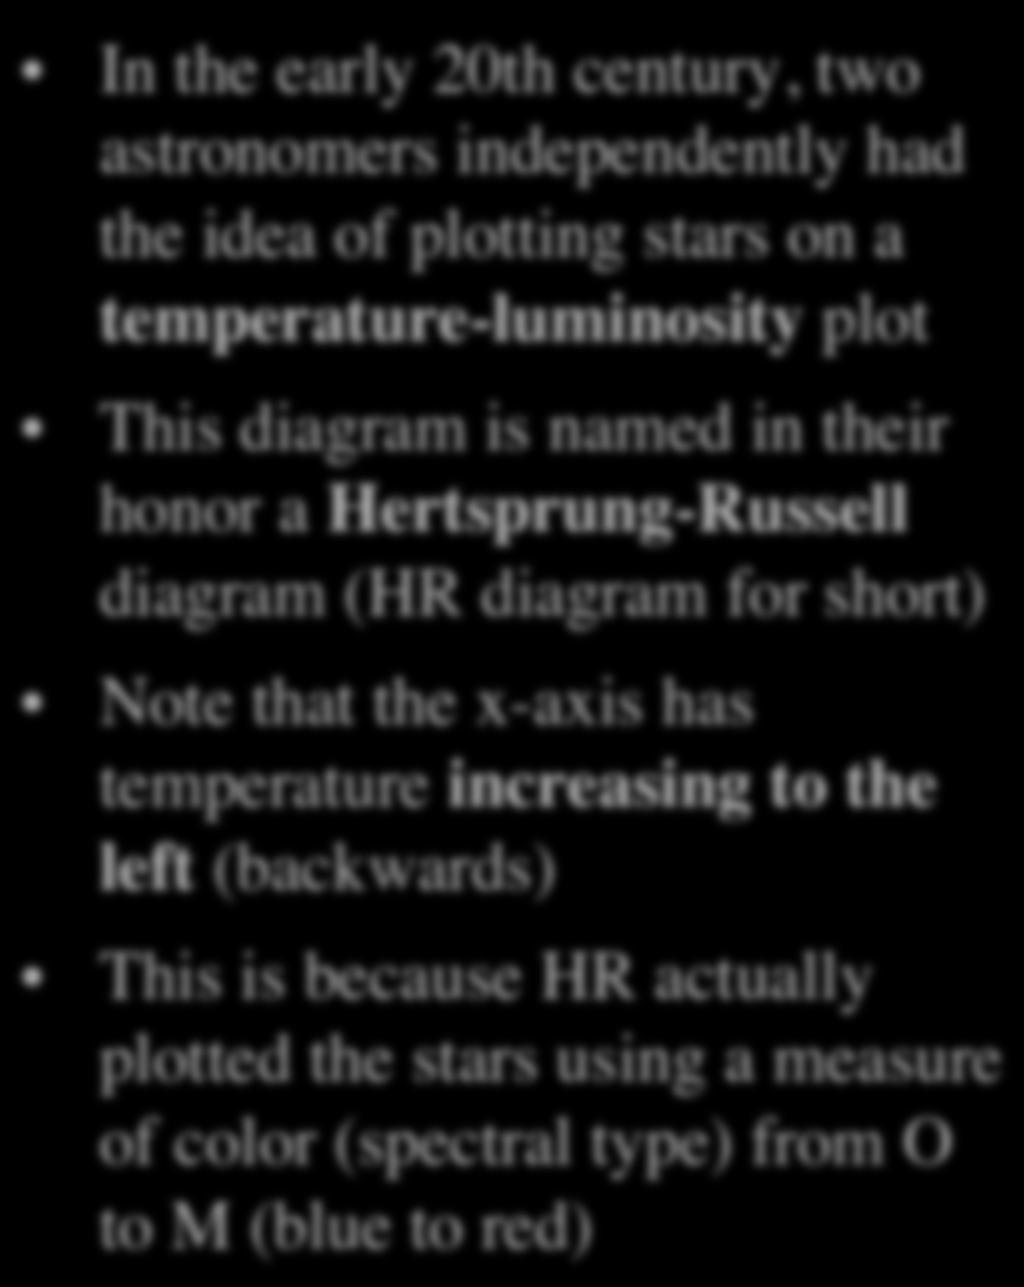 Hertzsprung-Russell (HR) Diagram In the early 20th century, two astronomers independently had the idea of plotting stars on a temperature-luminosity plot This diagram is named in their honor a